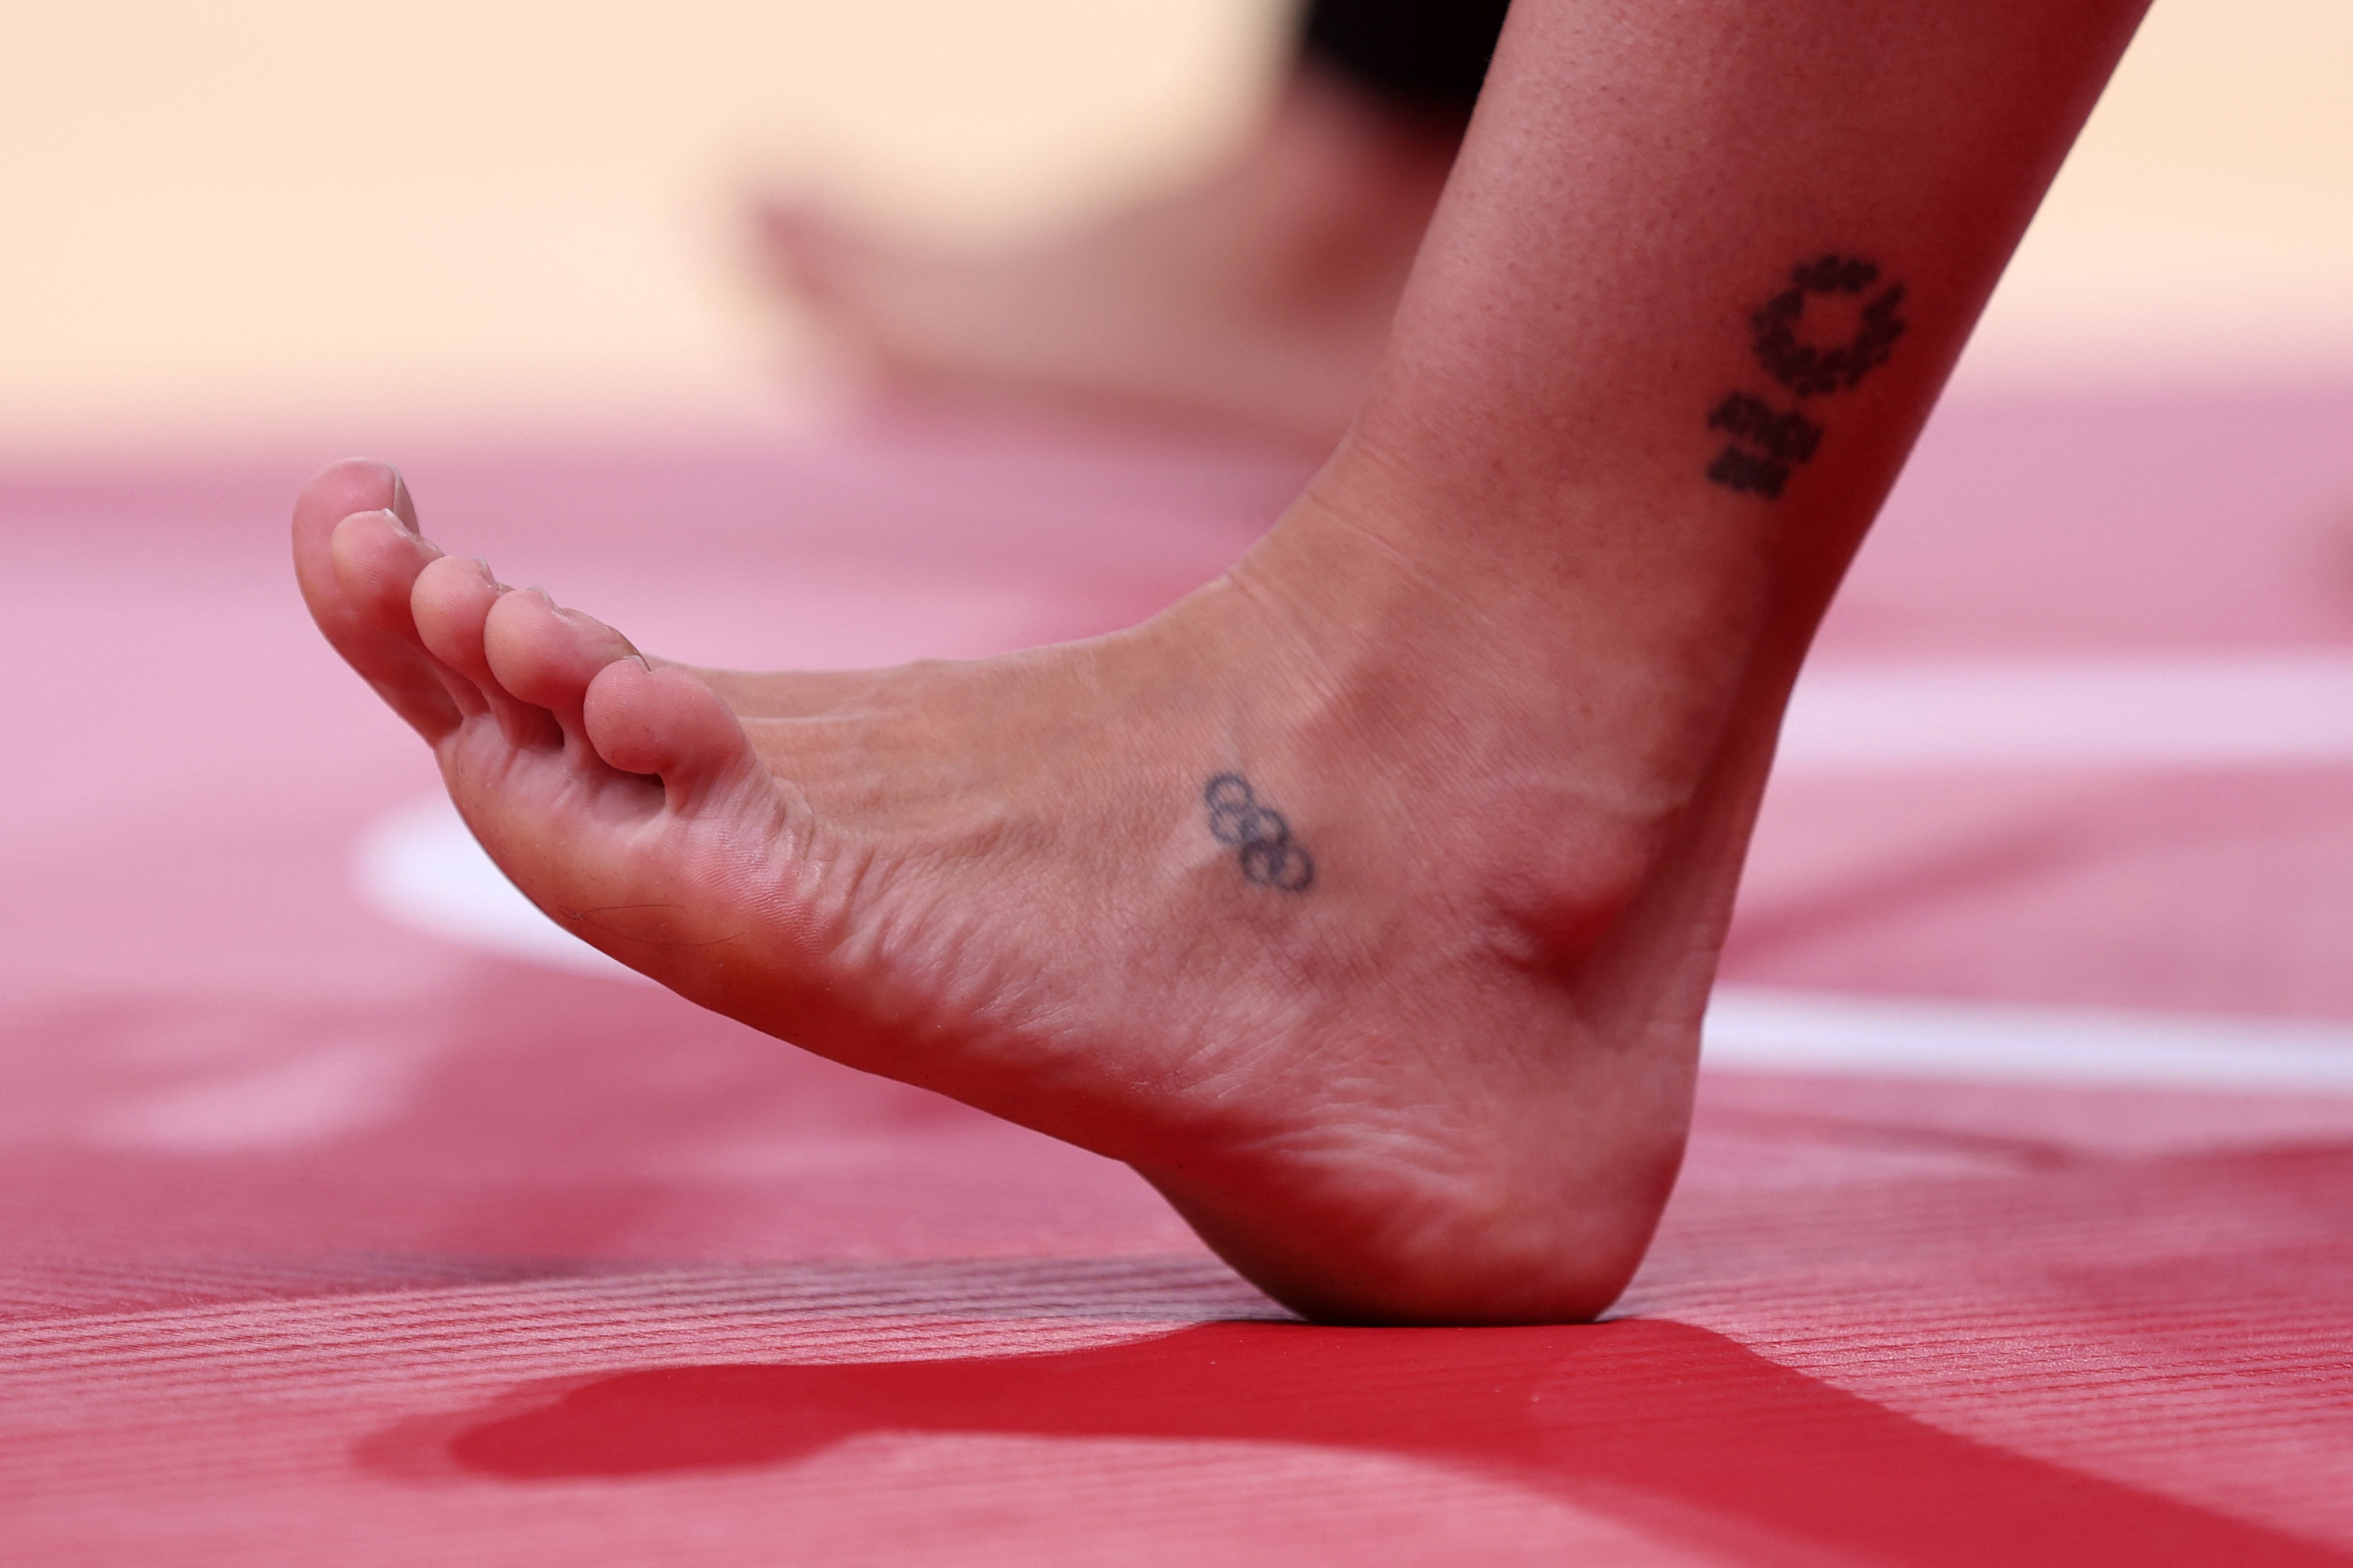 The foot of a judo athlete shows tiny Olympic rings tattoo